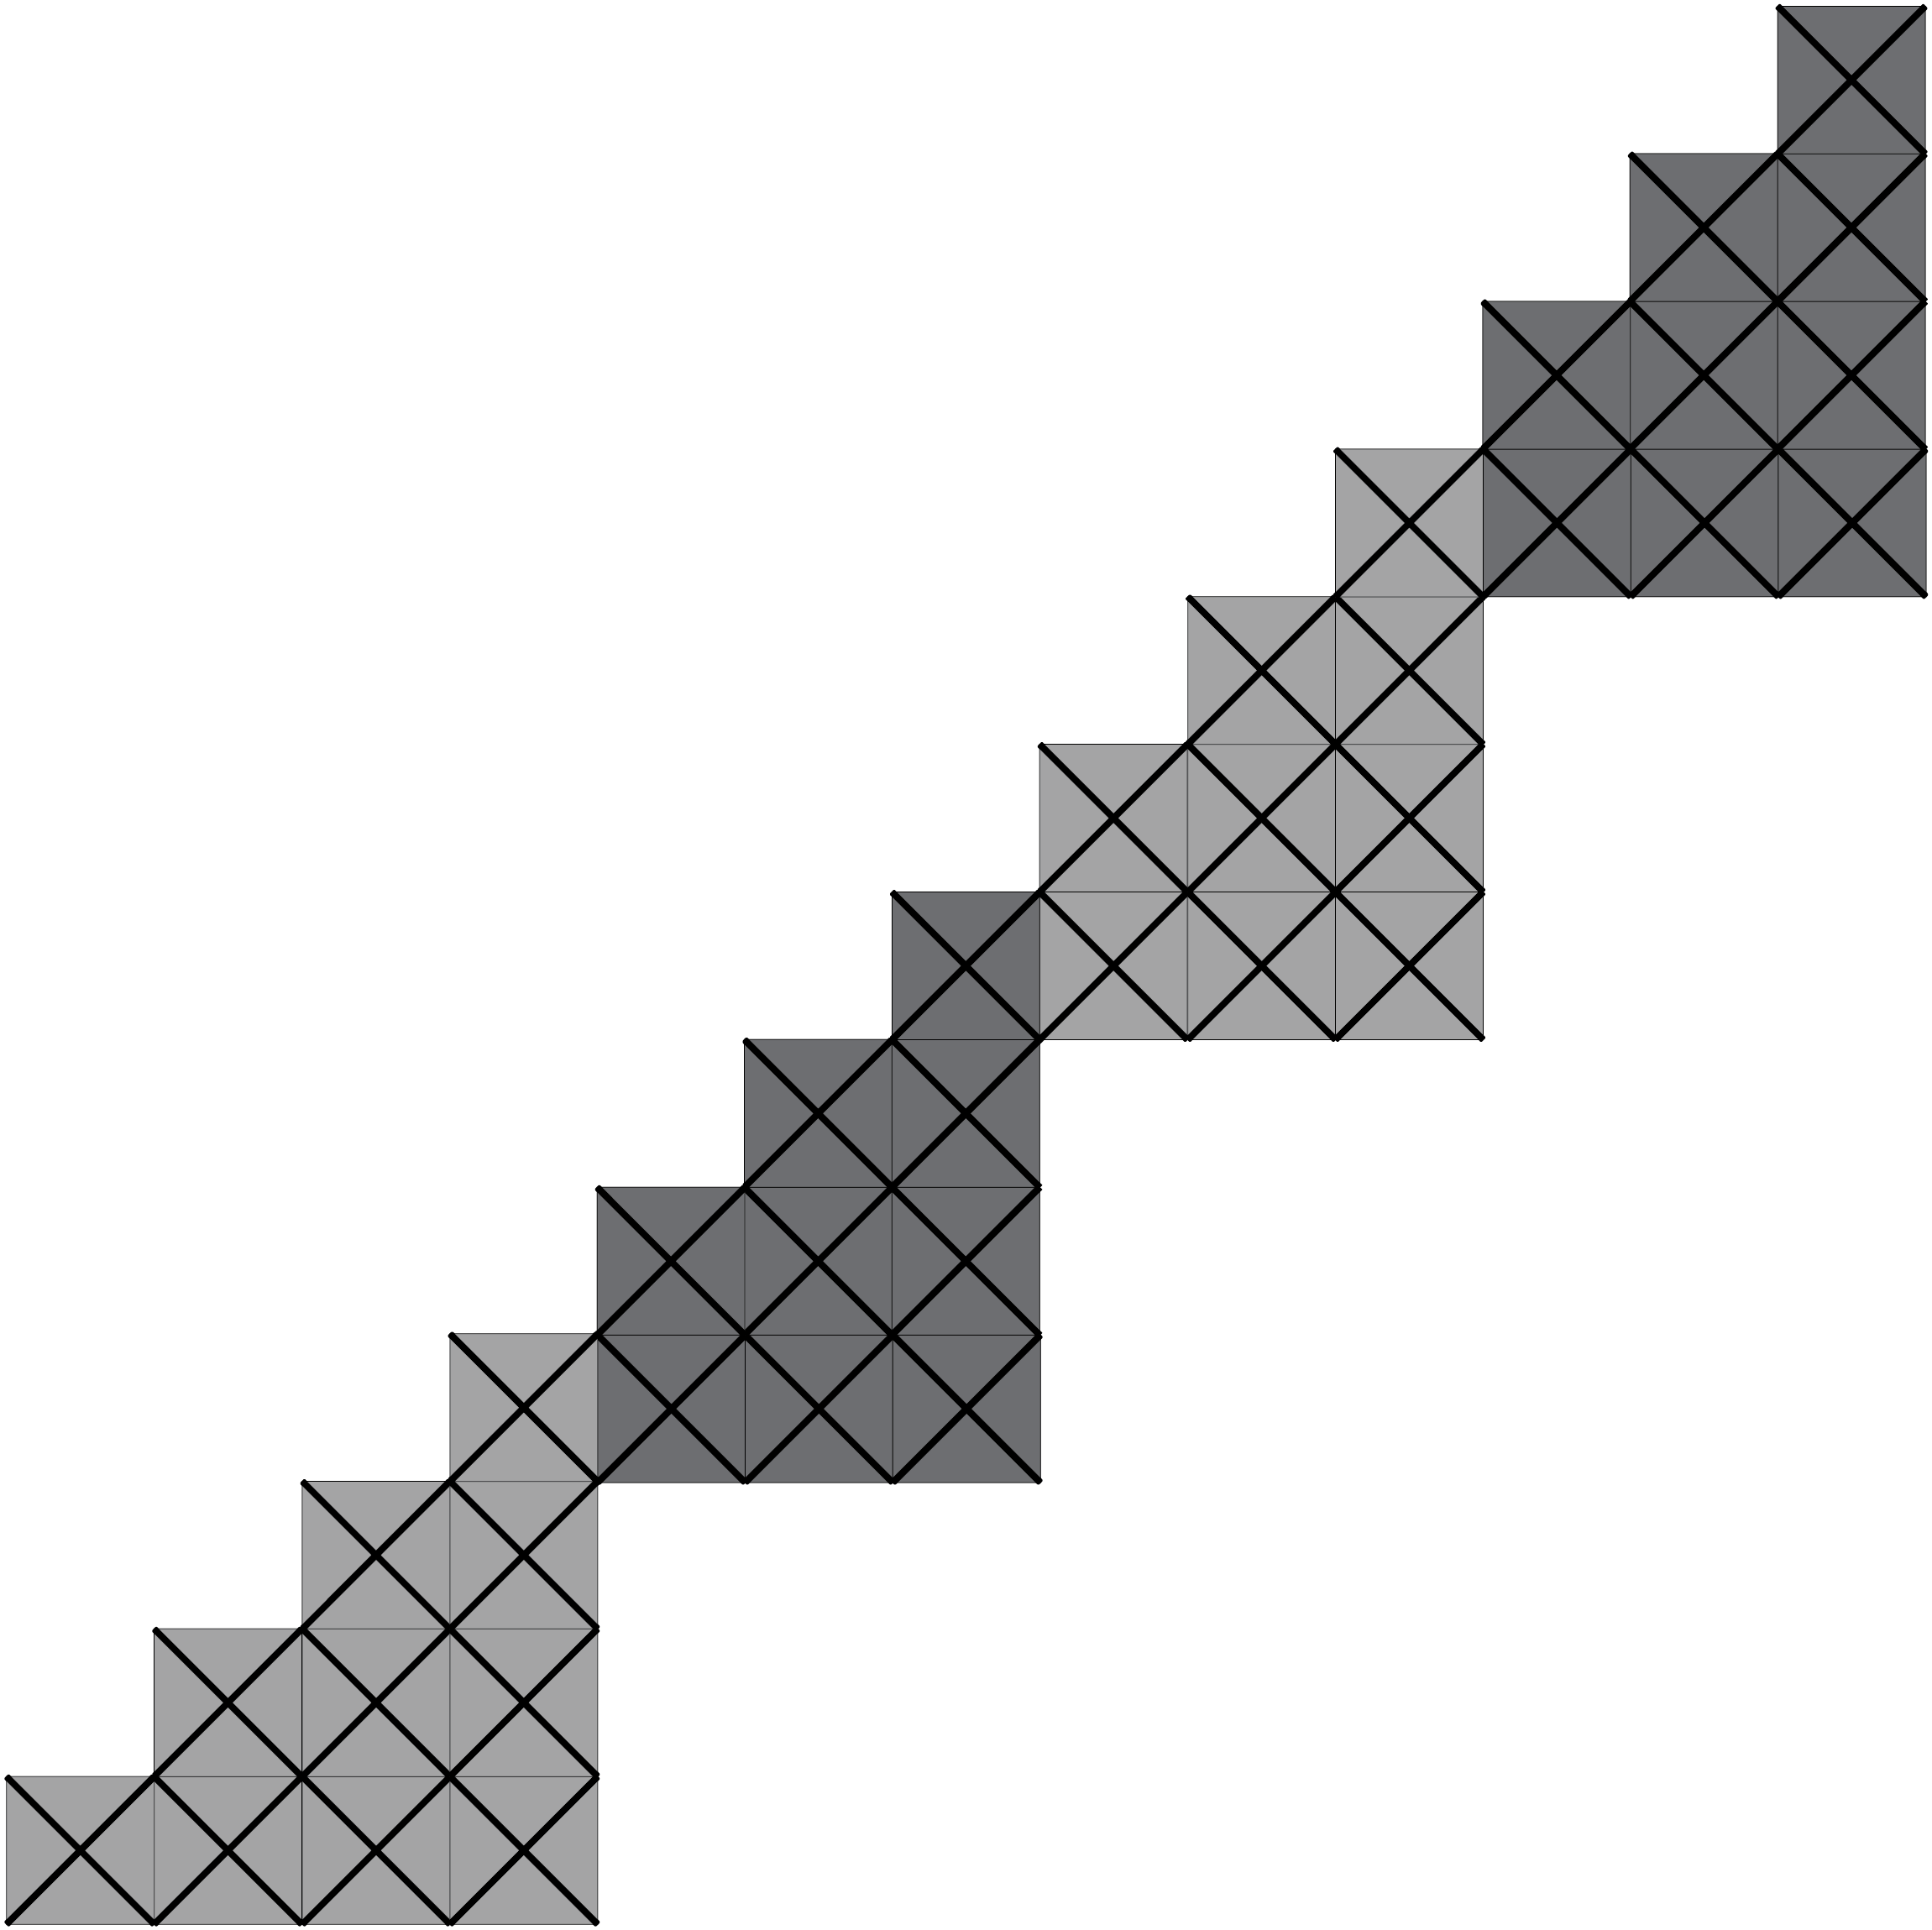 A string of four triangular patterns.